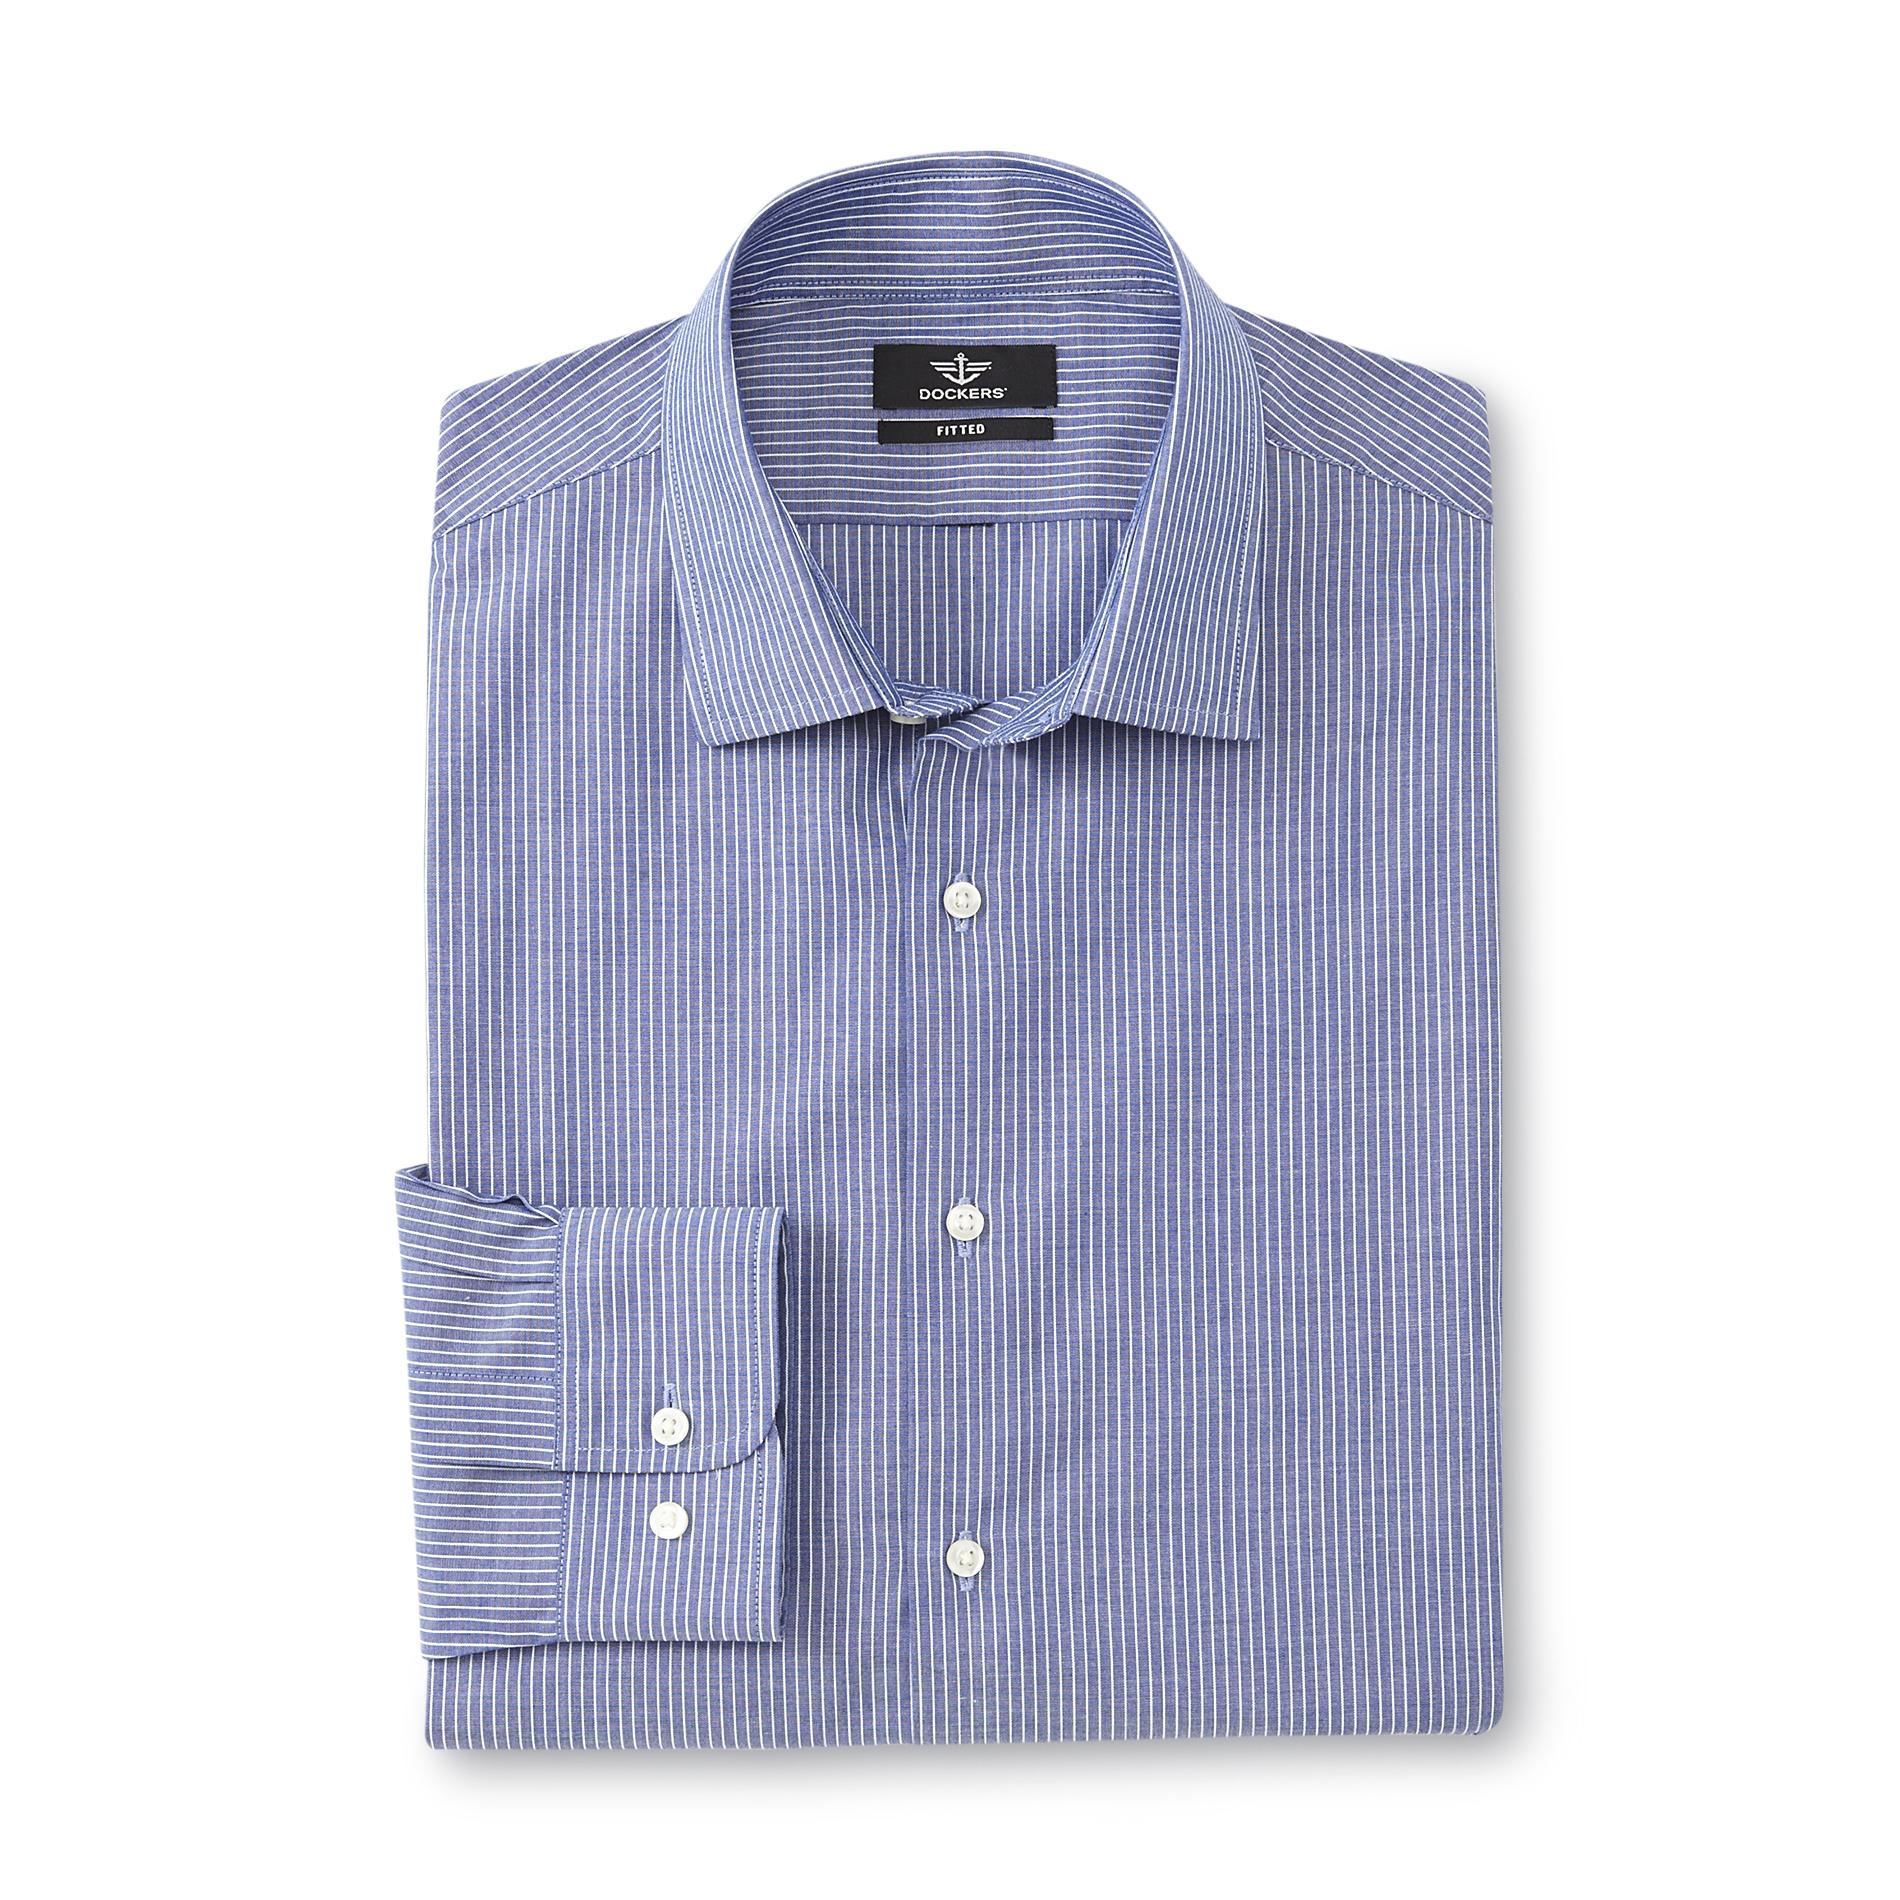 Dockers Men's Fitted Dress Shirt - Striped